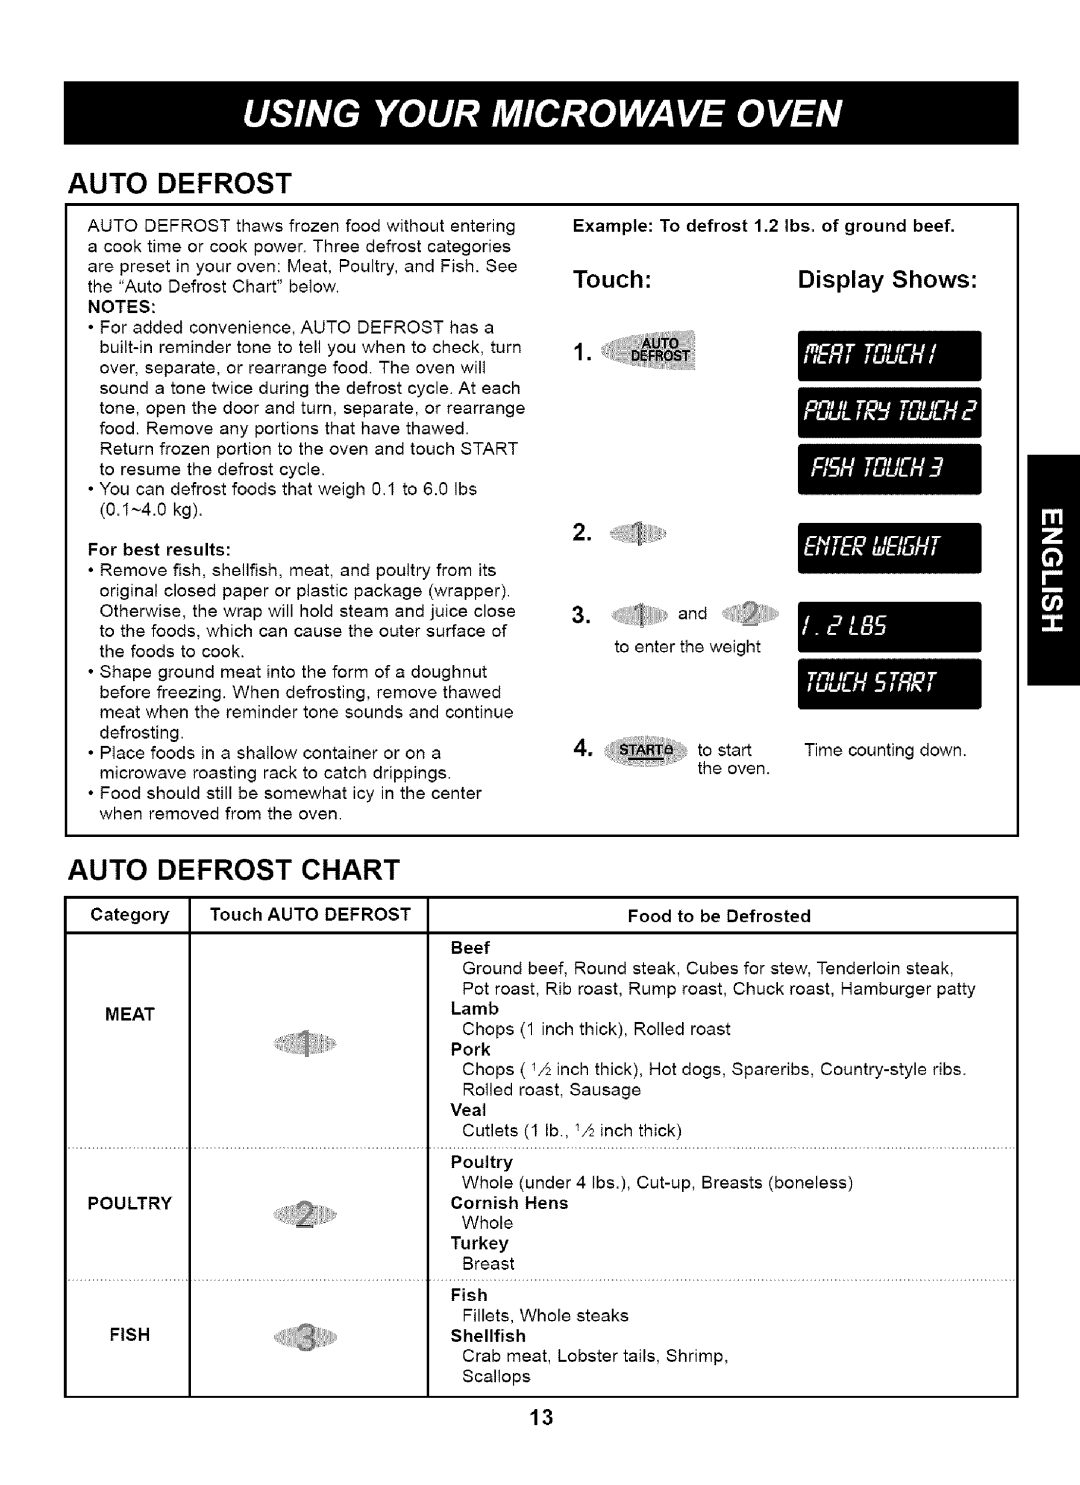 Kenmore 721.61283 Auto Defrost Chart, Touch, Display Shows, Example To defrost 1.2 Ibs. of ground beef, Category, Beef 